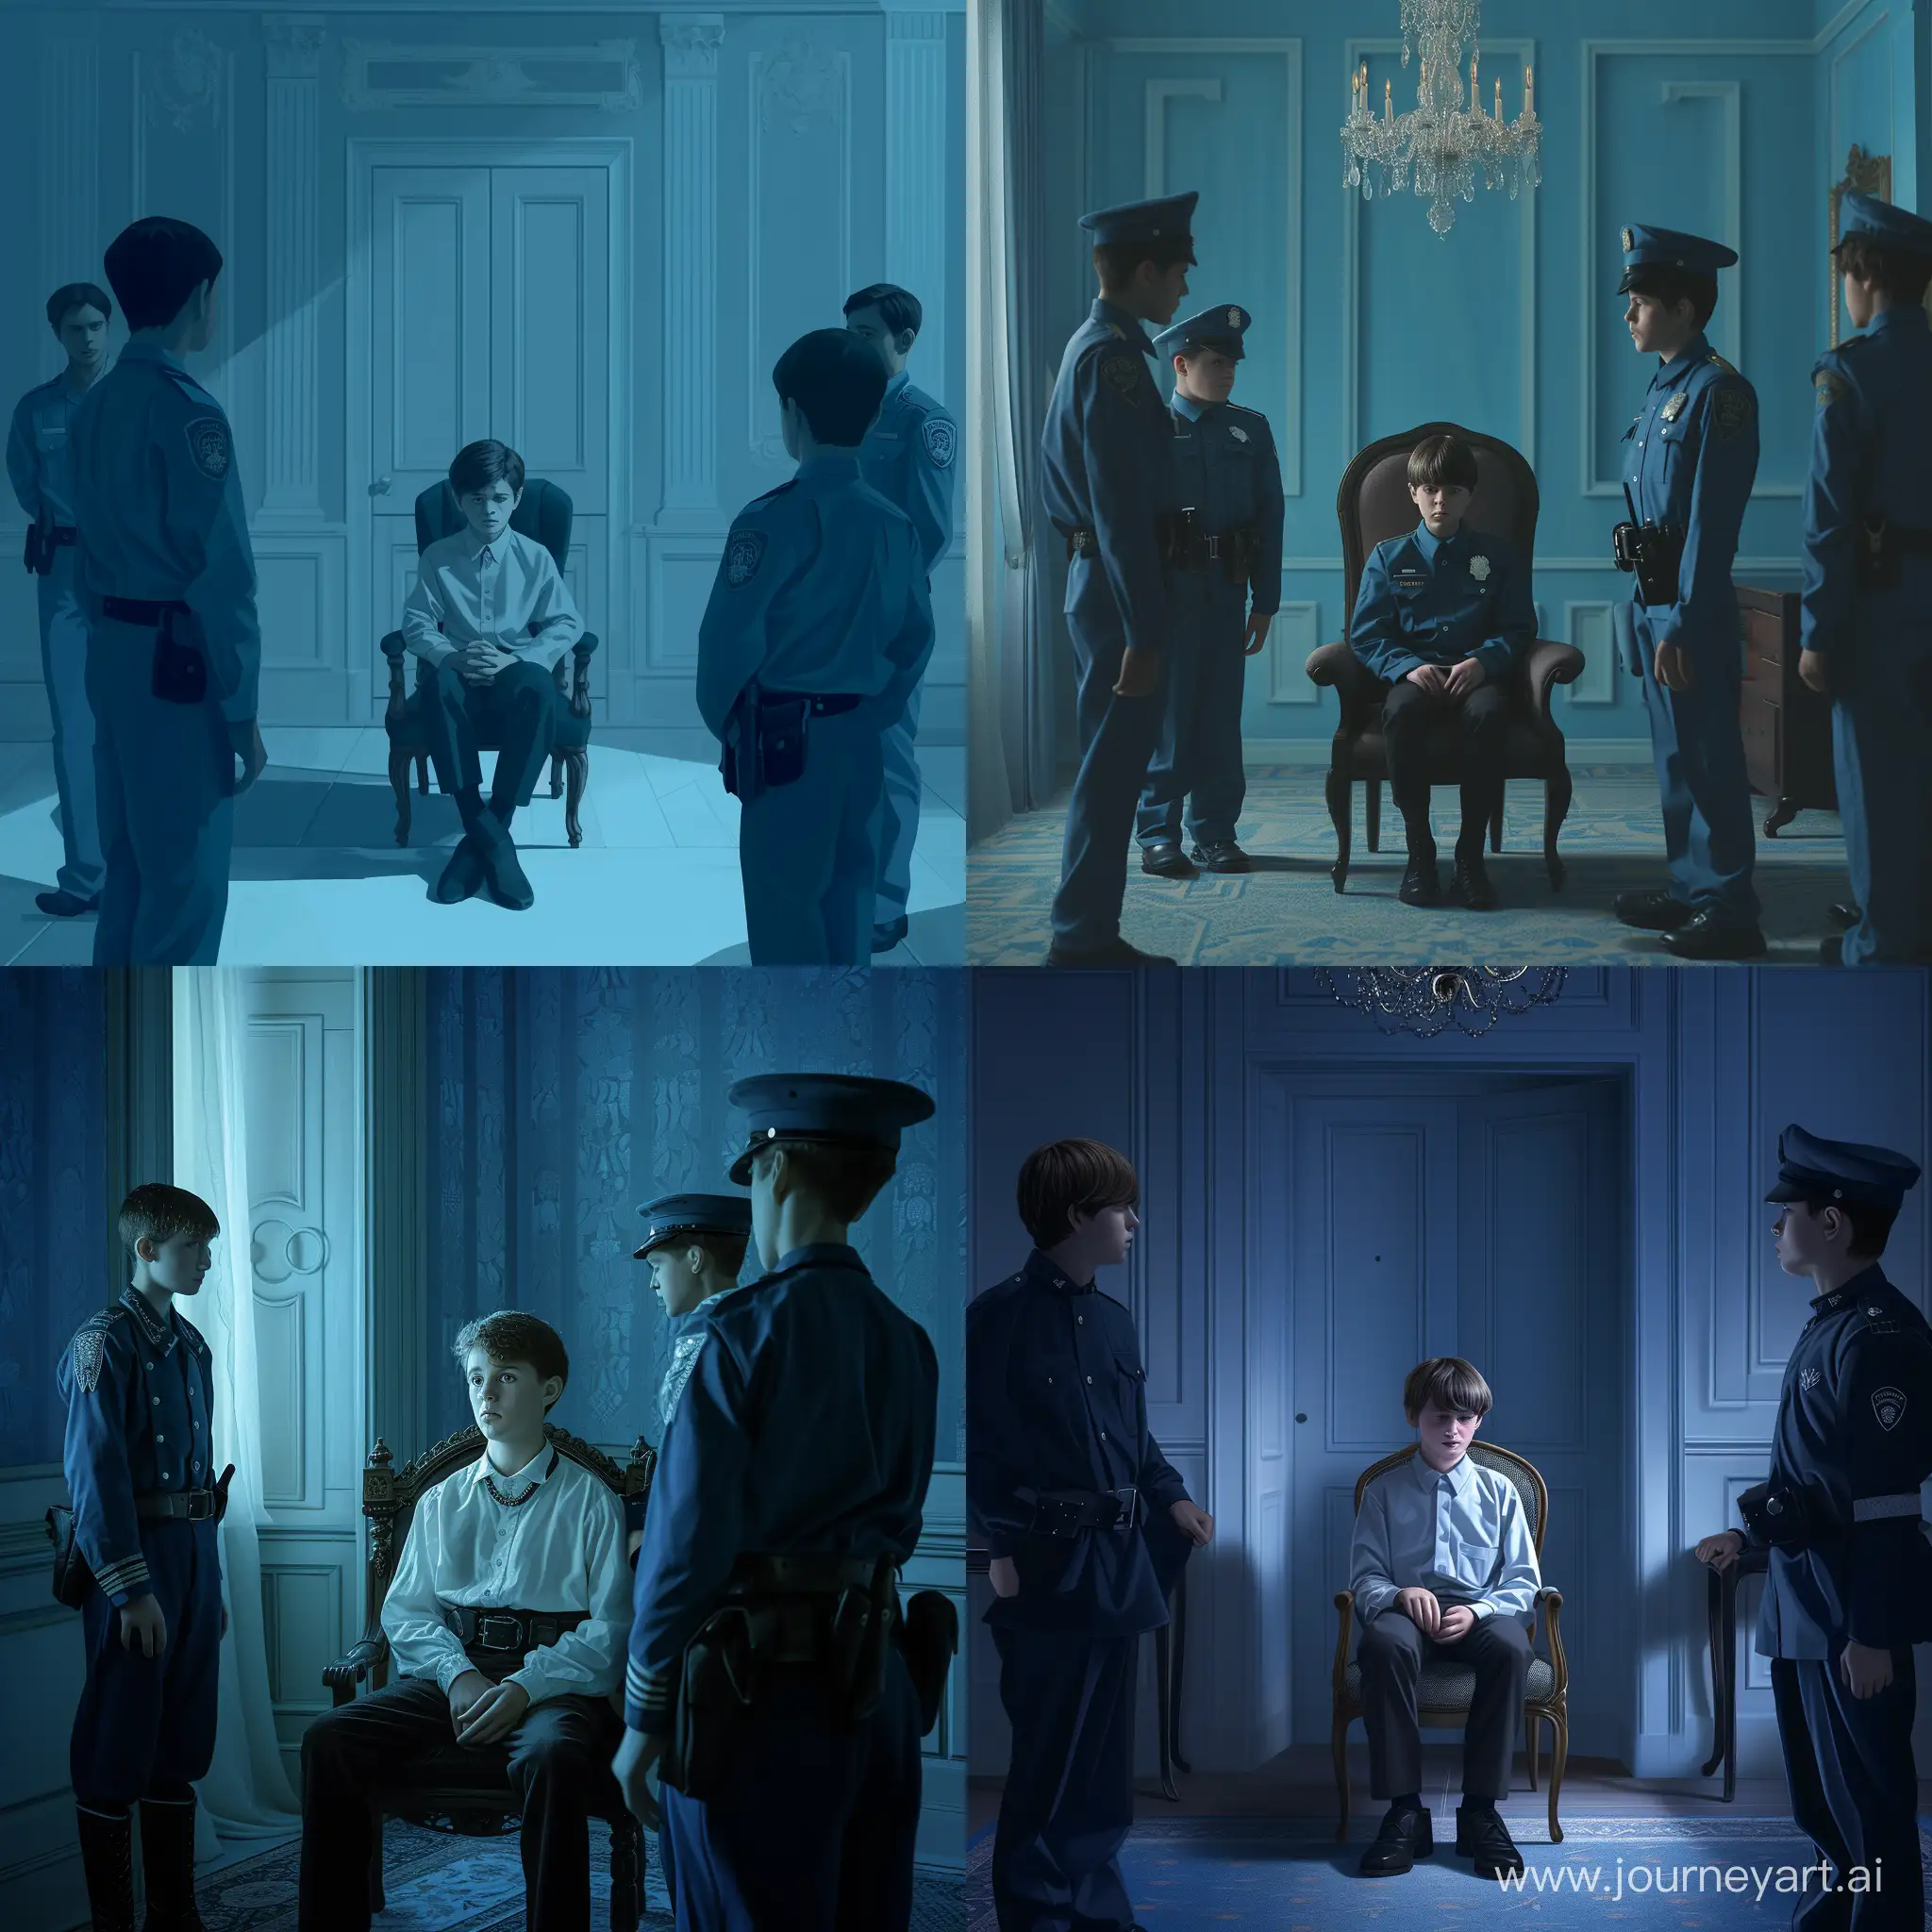 A 16-year-old boy sits in a room when 14-year-old teenagers acting as police officers come to report to him that he has been fired from his government job. The room is quite elegantly minimalistic, decorated in blue tones. The image should be rendered in 19th century style. The mood of the scene should be tense and emotional, reflecting the internal conflict and drama of the moment